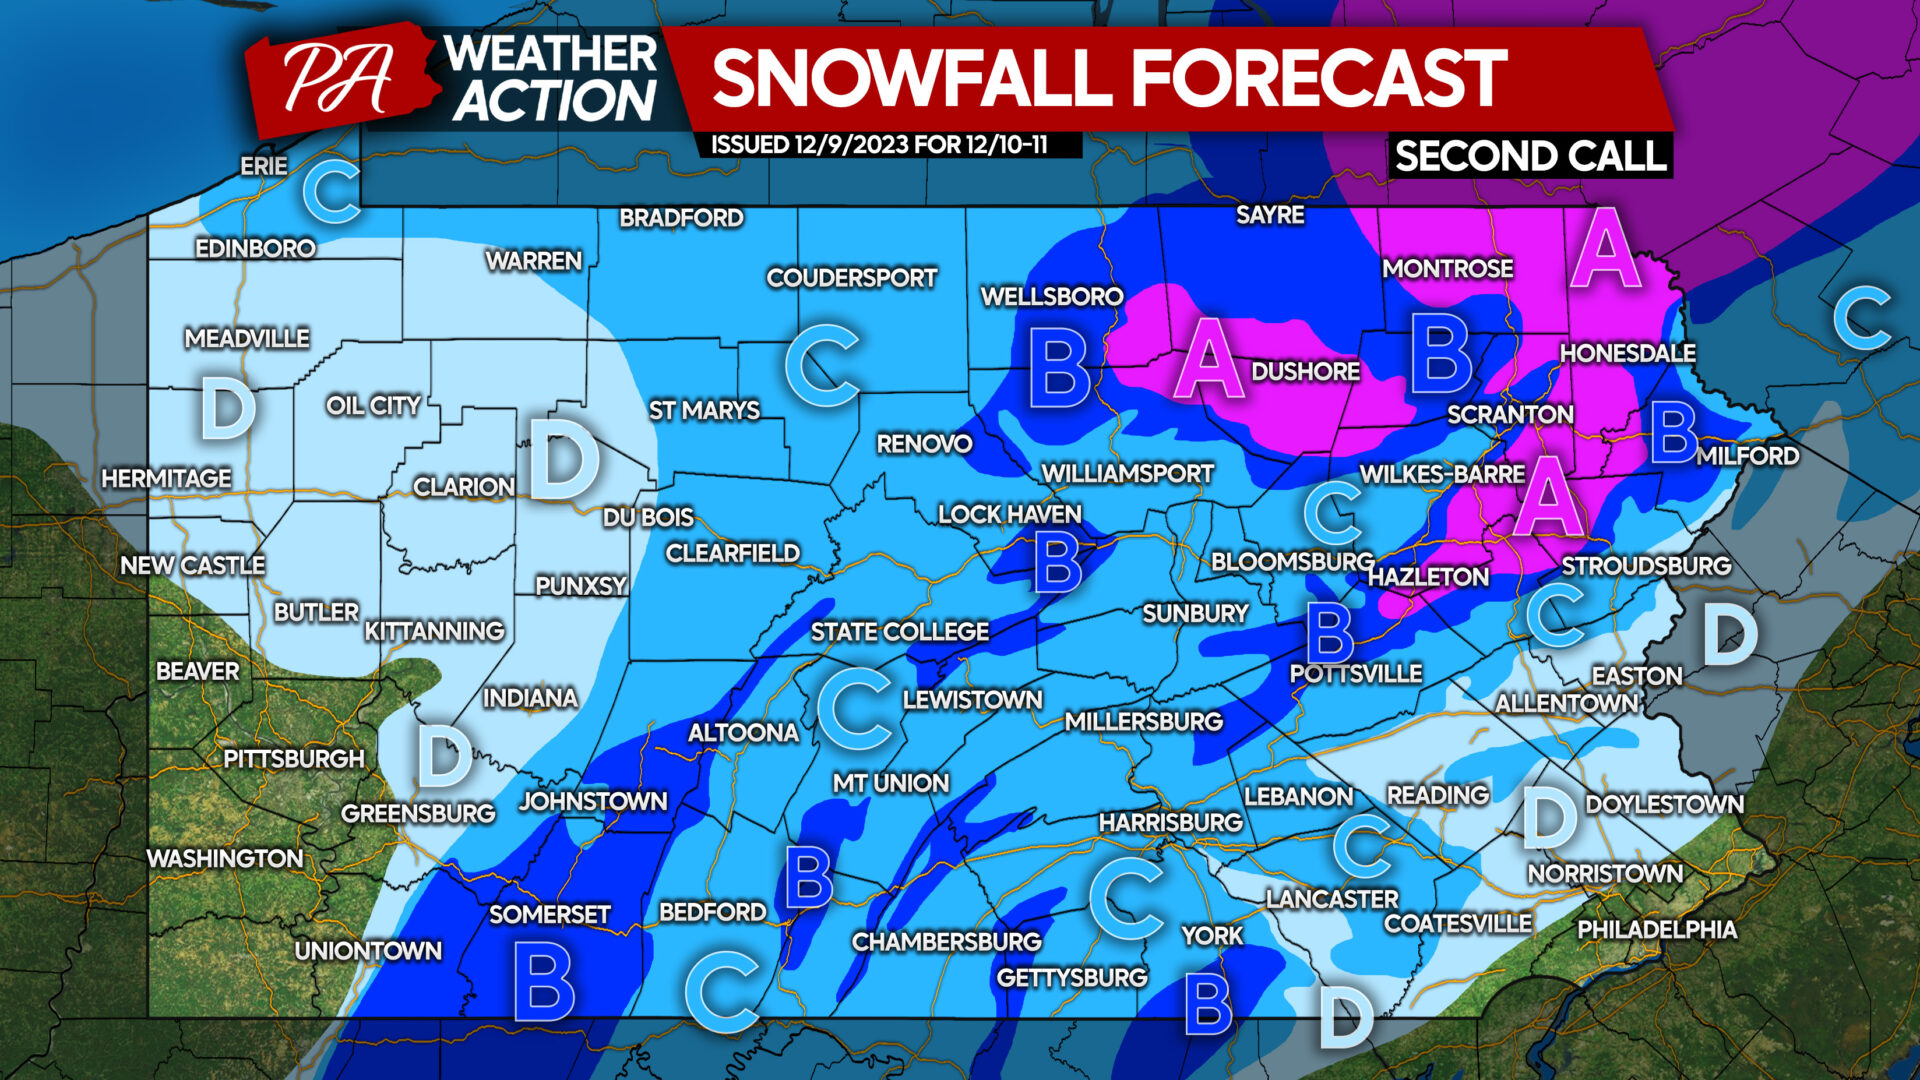 Second Call Snowfall Forecast for Sunday Evening – Monday’s Morning’s Rain to Snowstorm (Free Article)